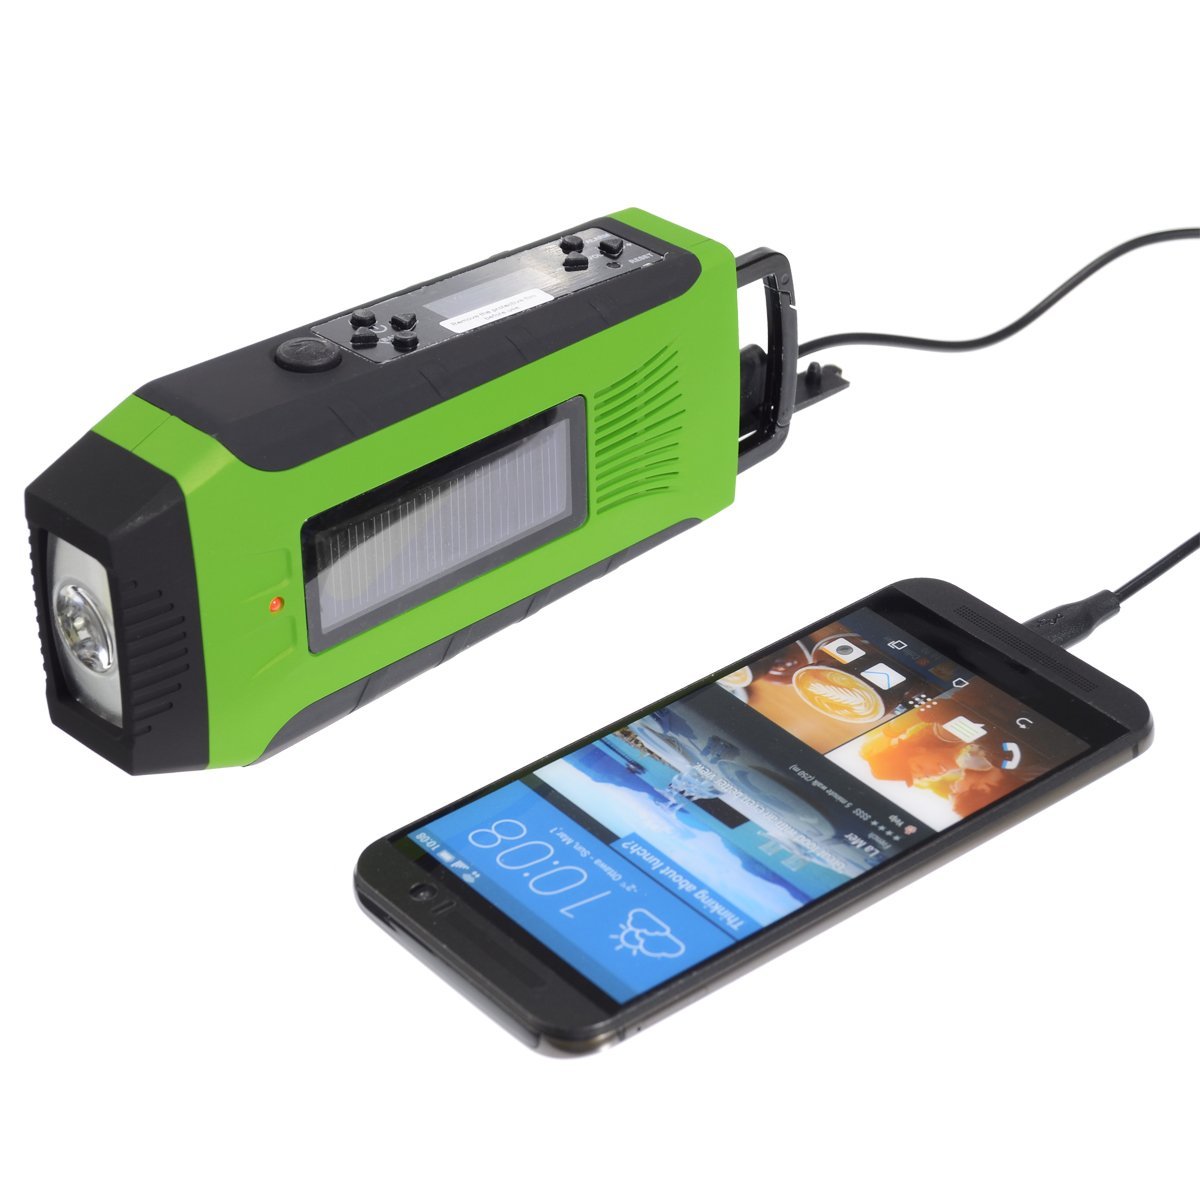 Find Outdoor Radio Dynamo Survival Solar Self Powered AM FM NOAA Weather Radio Phone Power Bank for Sale on Gipsybee.com with cryptocurrencies